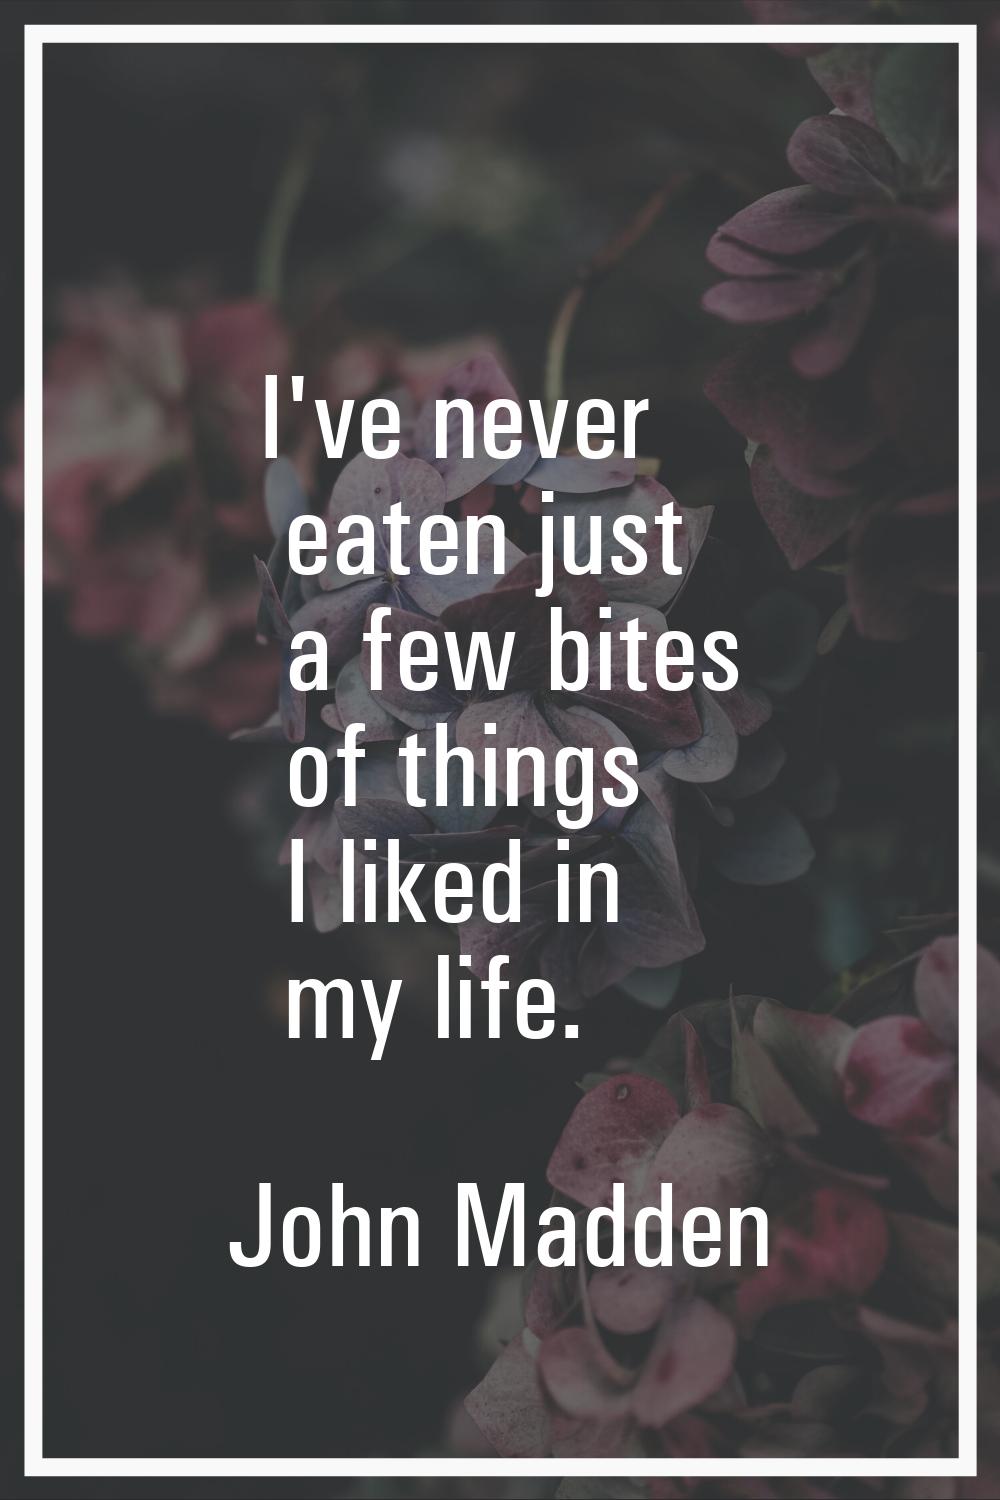 I've never eaten just a few bites of things I liked in my life.